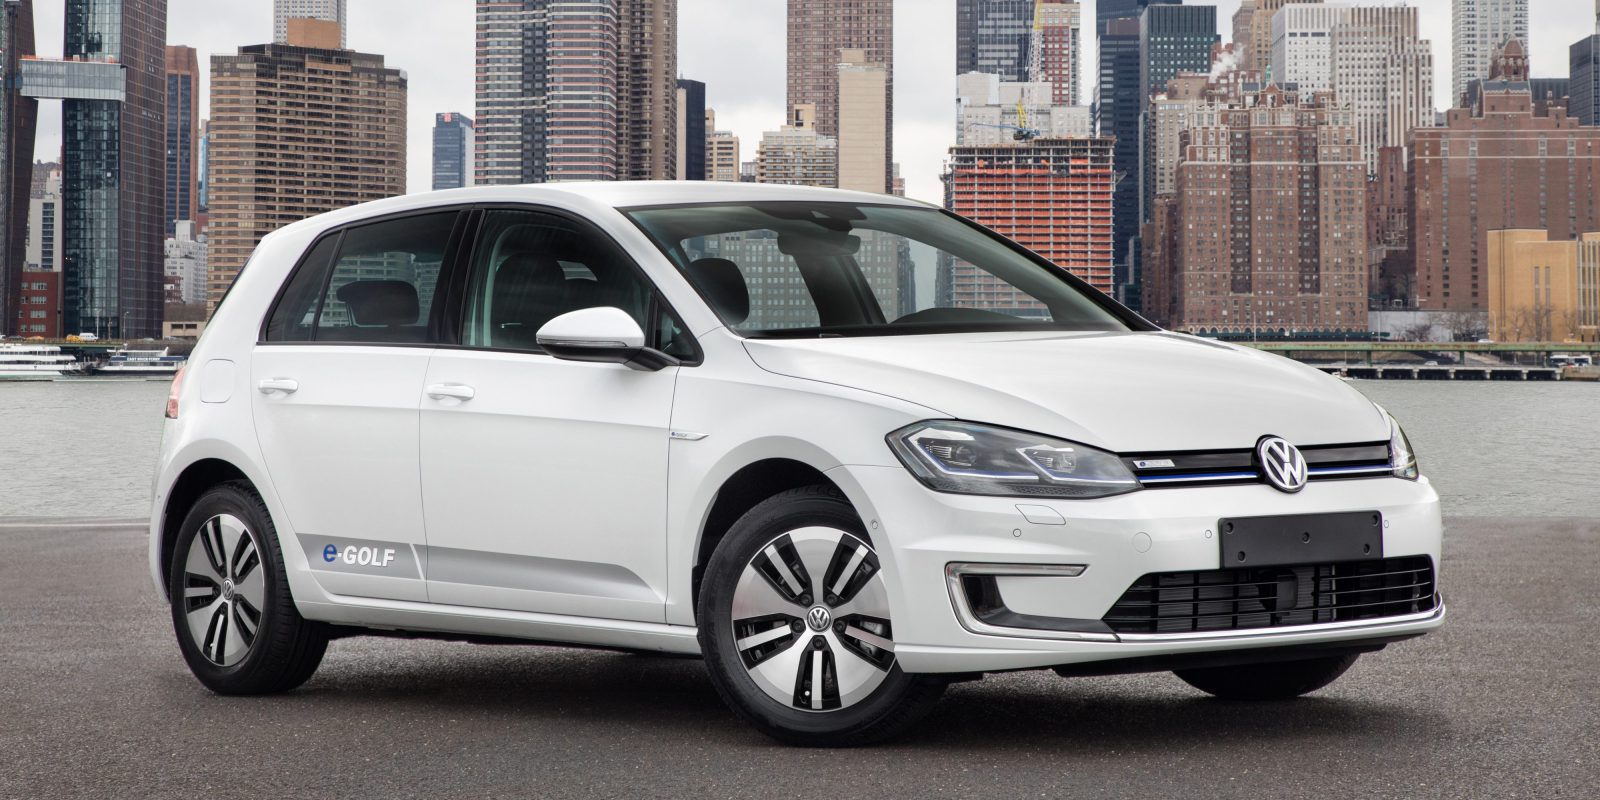 Volkswagen E-Golf - Affordable Electric cars